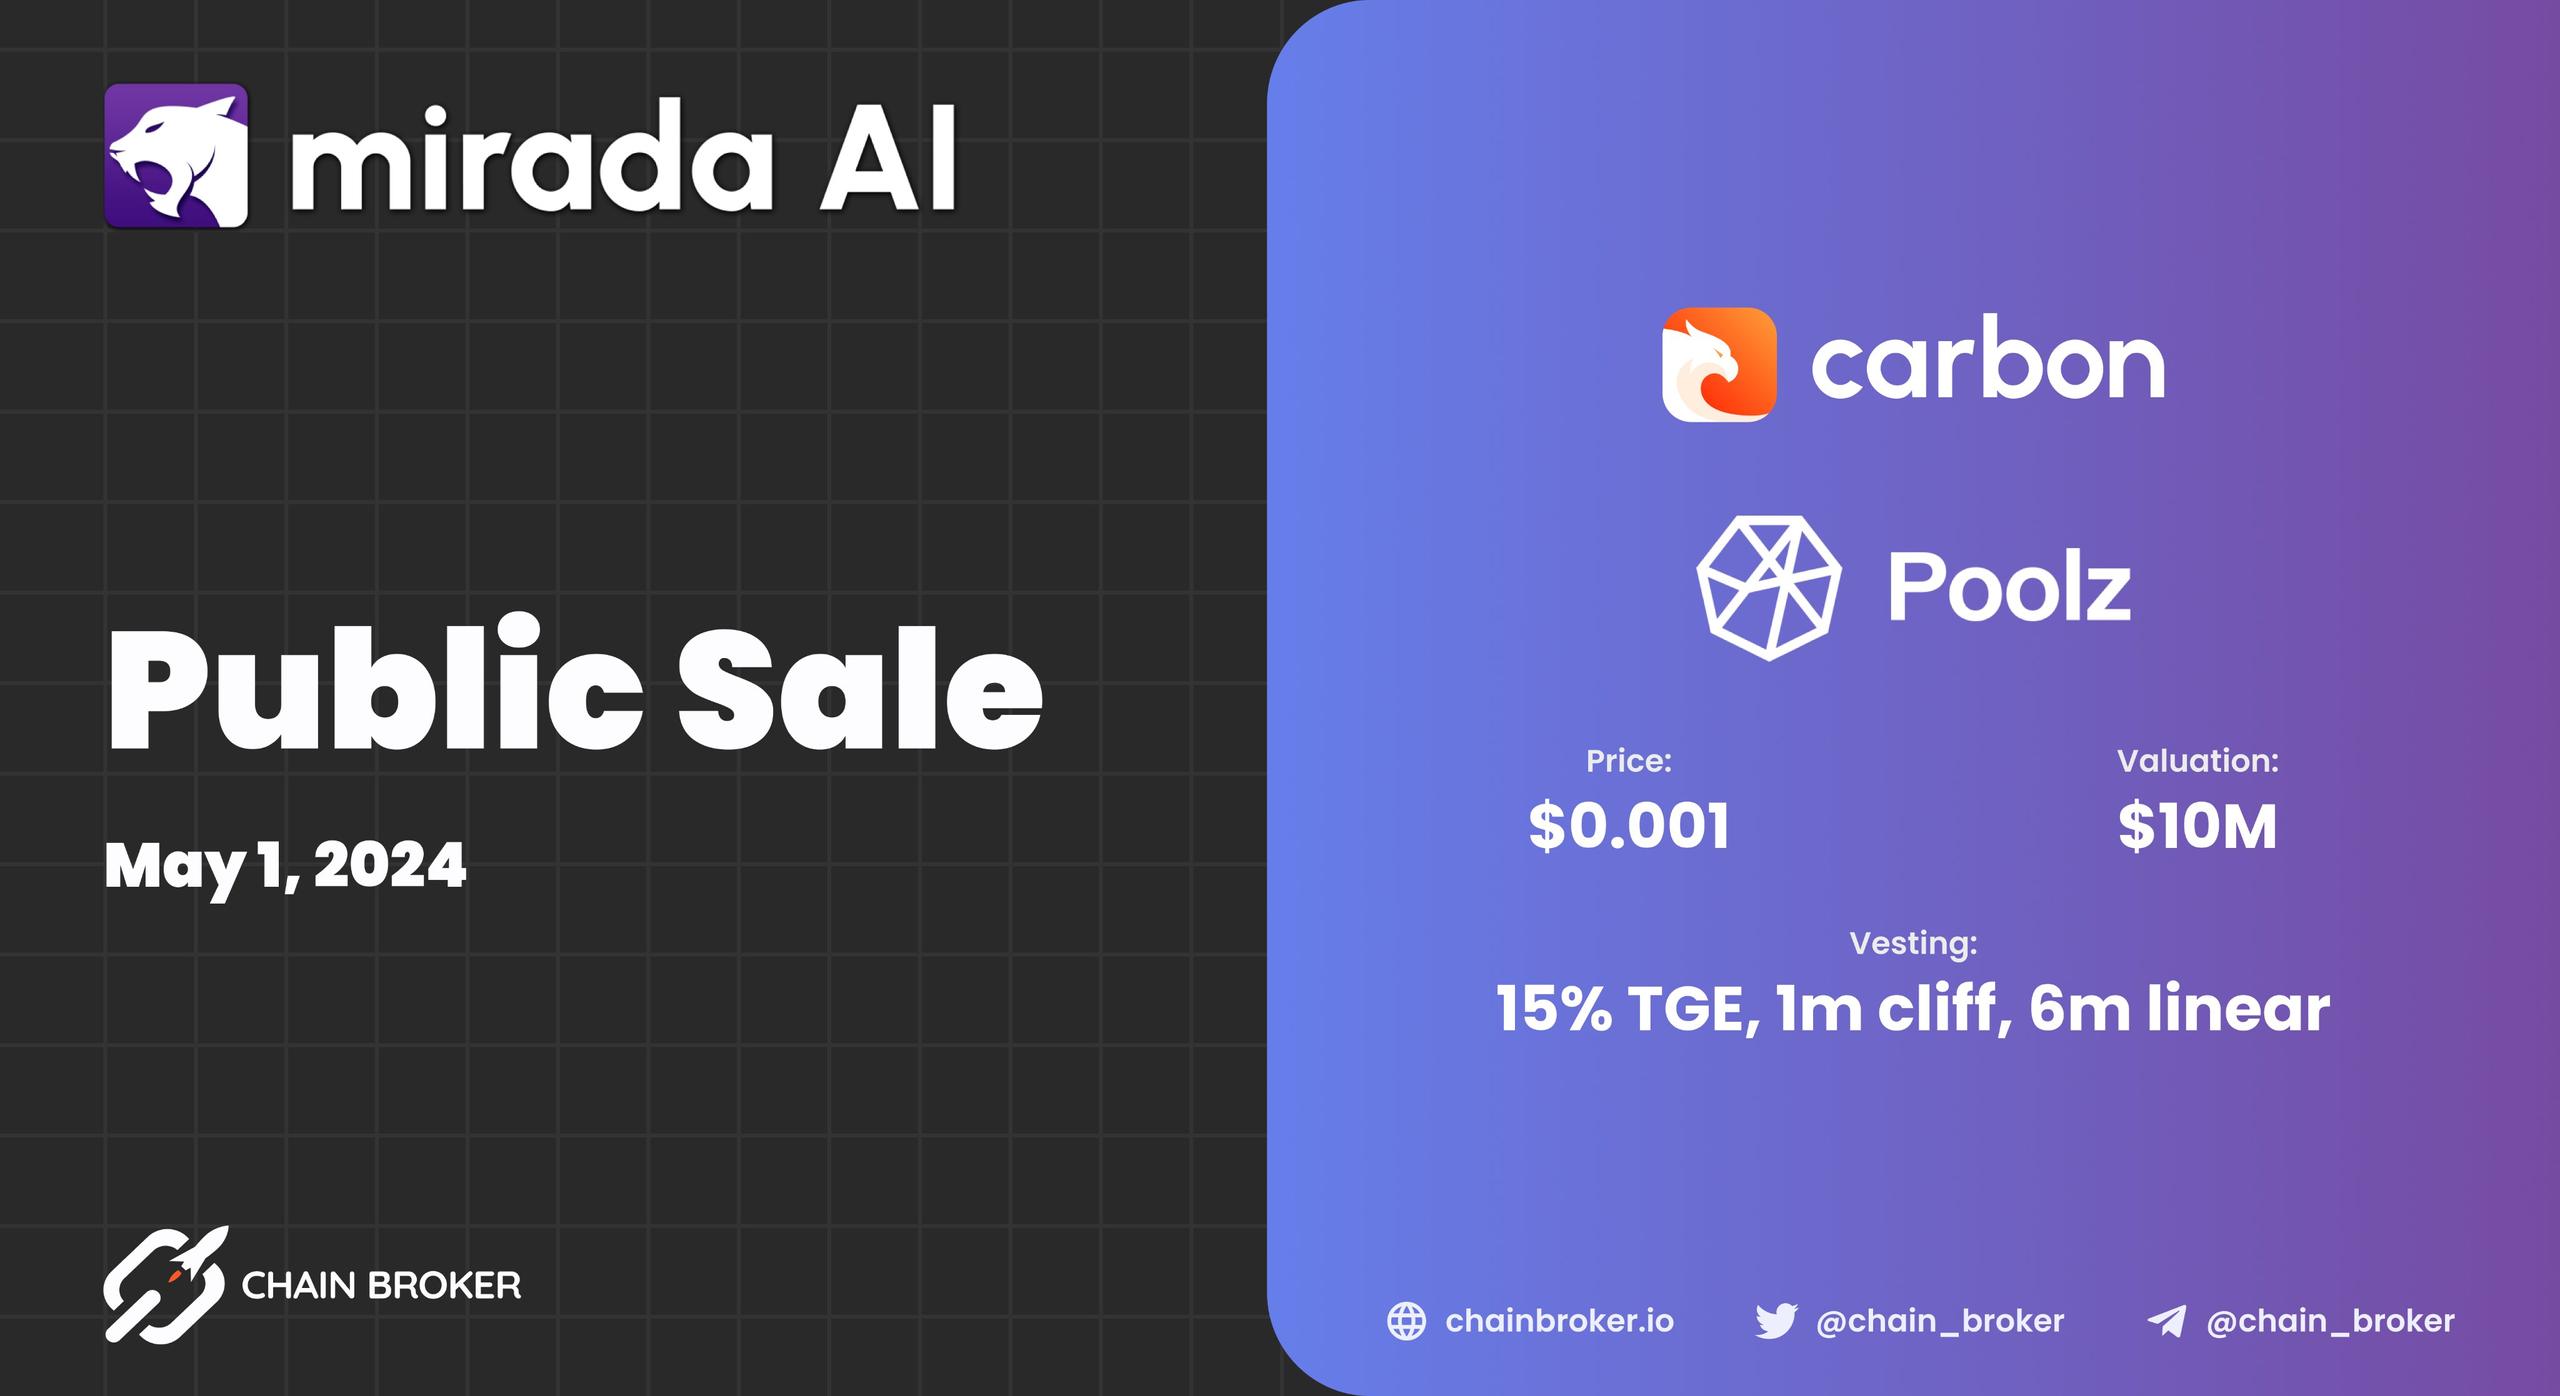 Mirada AI will conduct a Public Sale on Carbon Launchpad & Poolz Finance